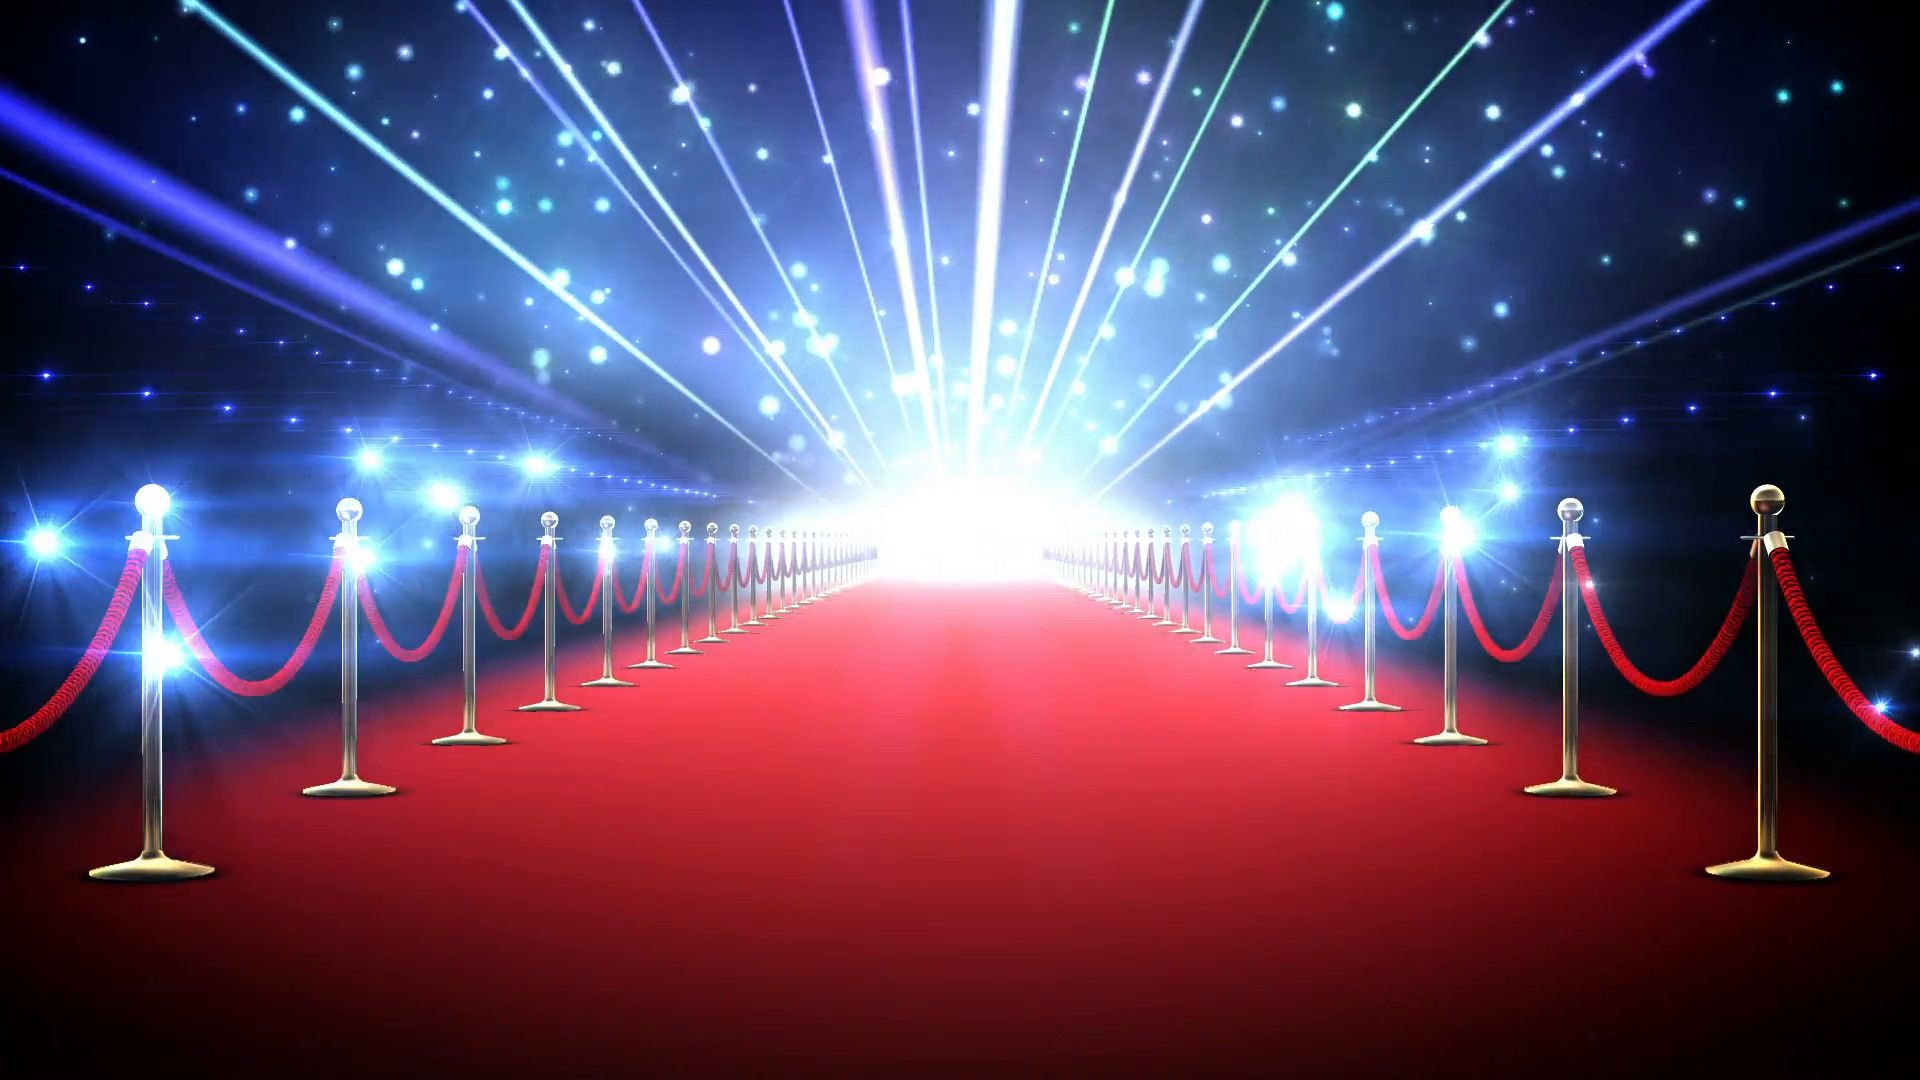 Red carpet wallpapers, Glamorous backgrounds, Celebrity fashion, Star-studded events, 1920x1080 Full HD Desktop